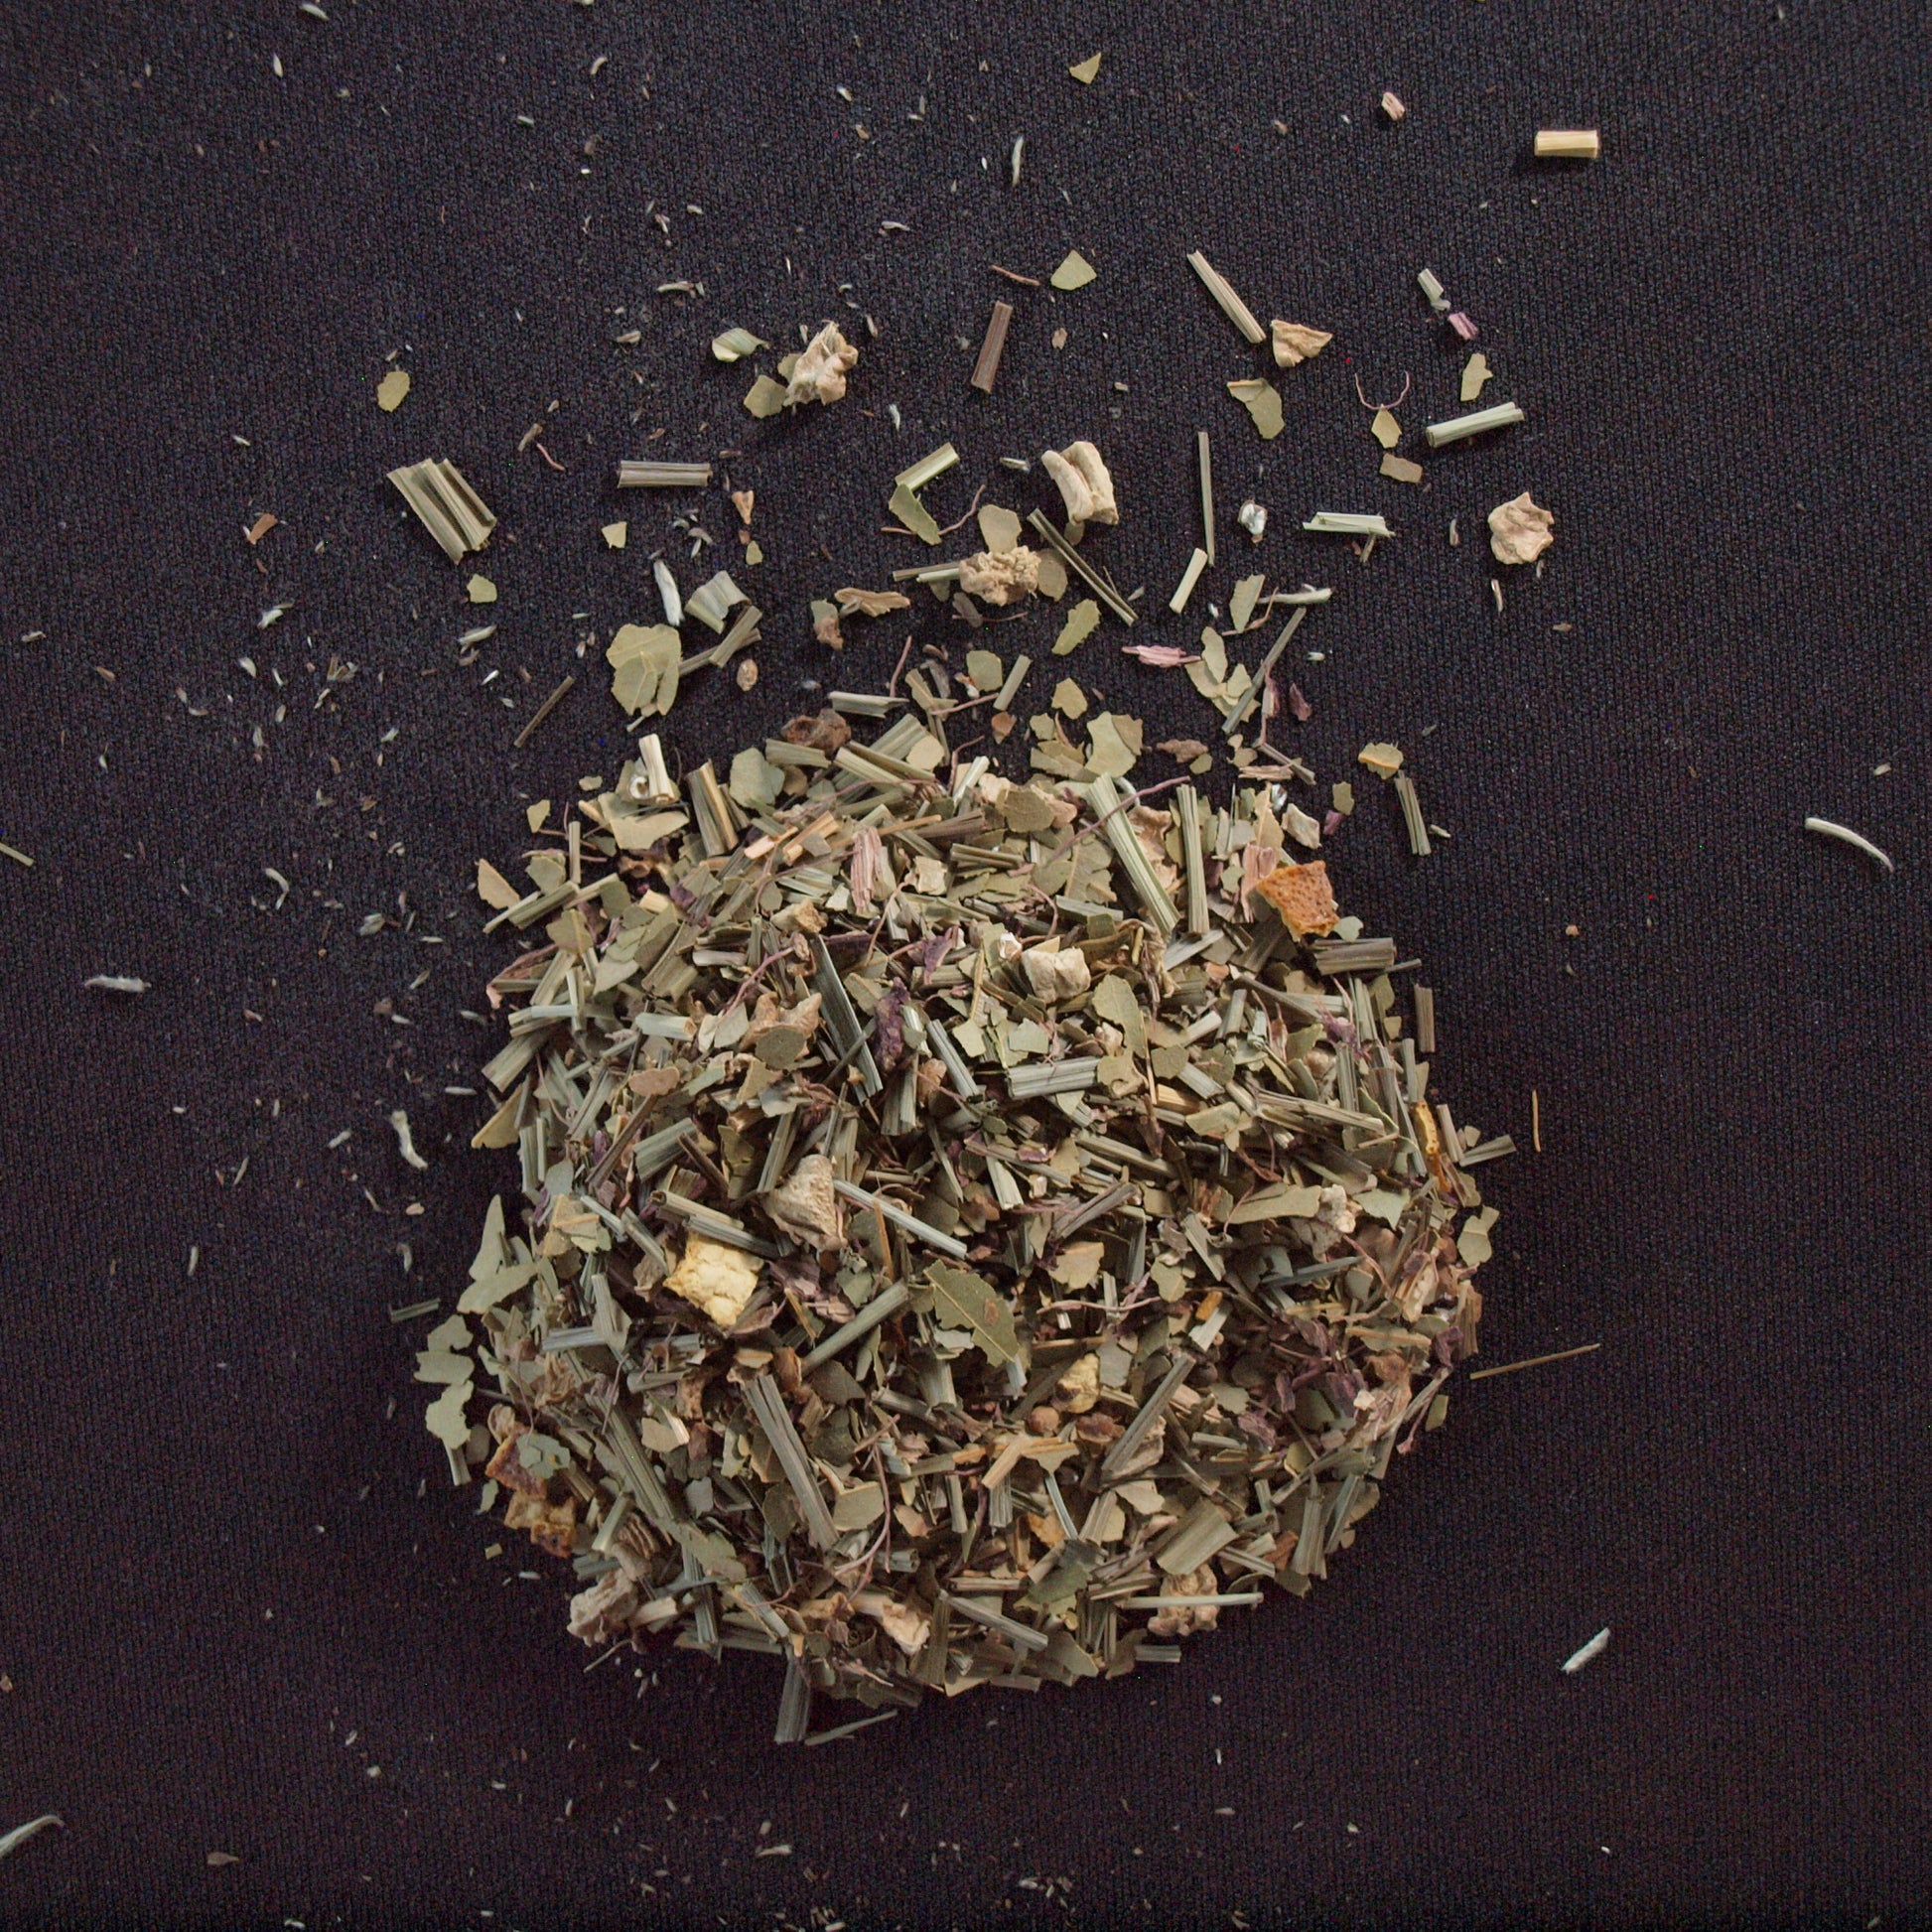 Loose Celestial Chai (Decaf) herbal chai tea scattered on a dark surface